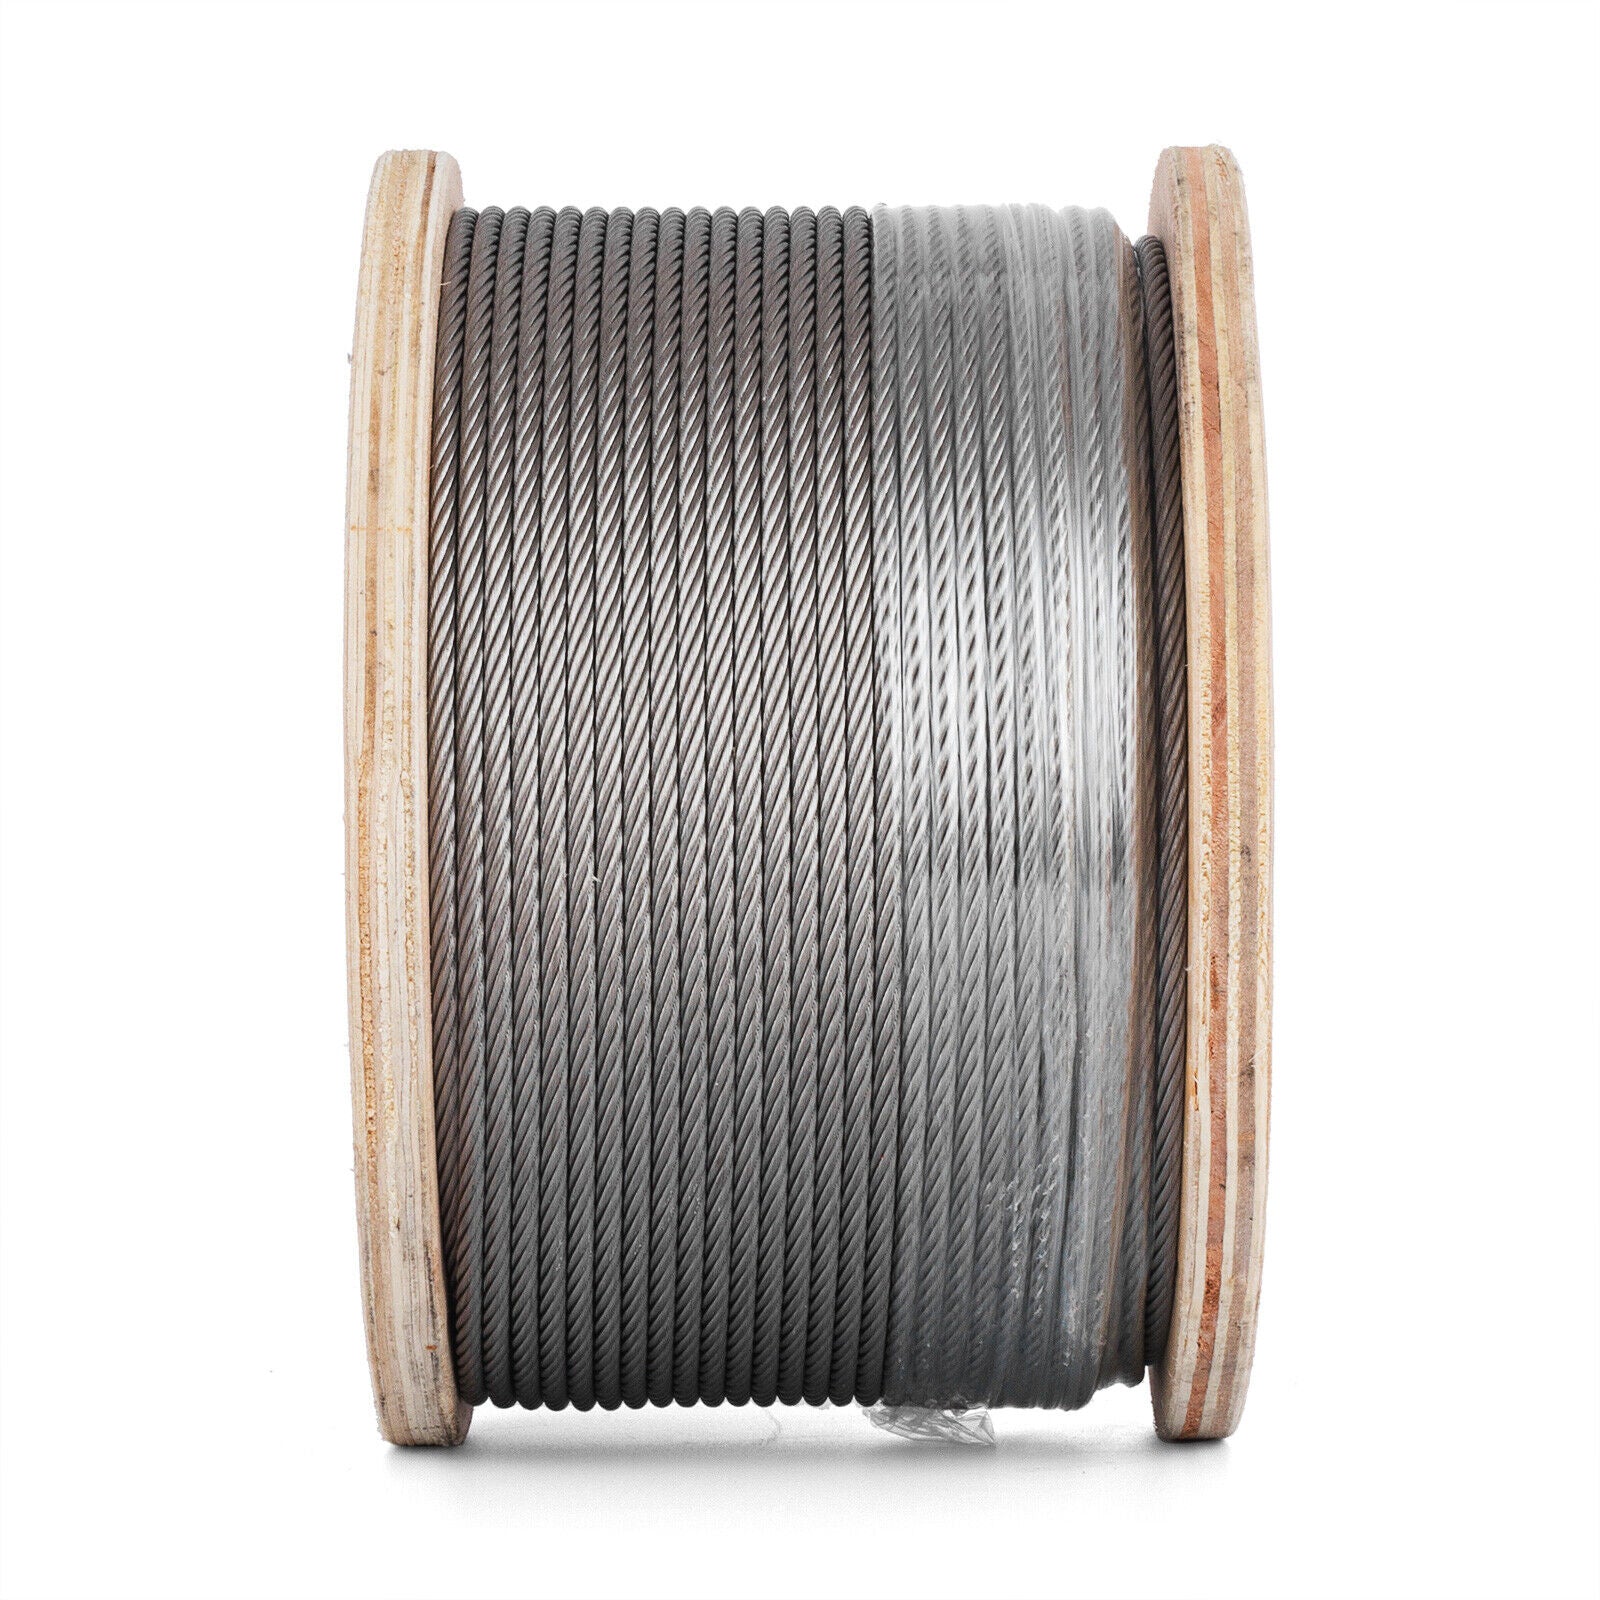 T304 Stainless Steel Cable Wire Rope 3/16